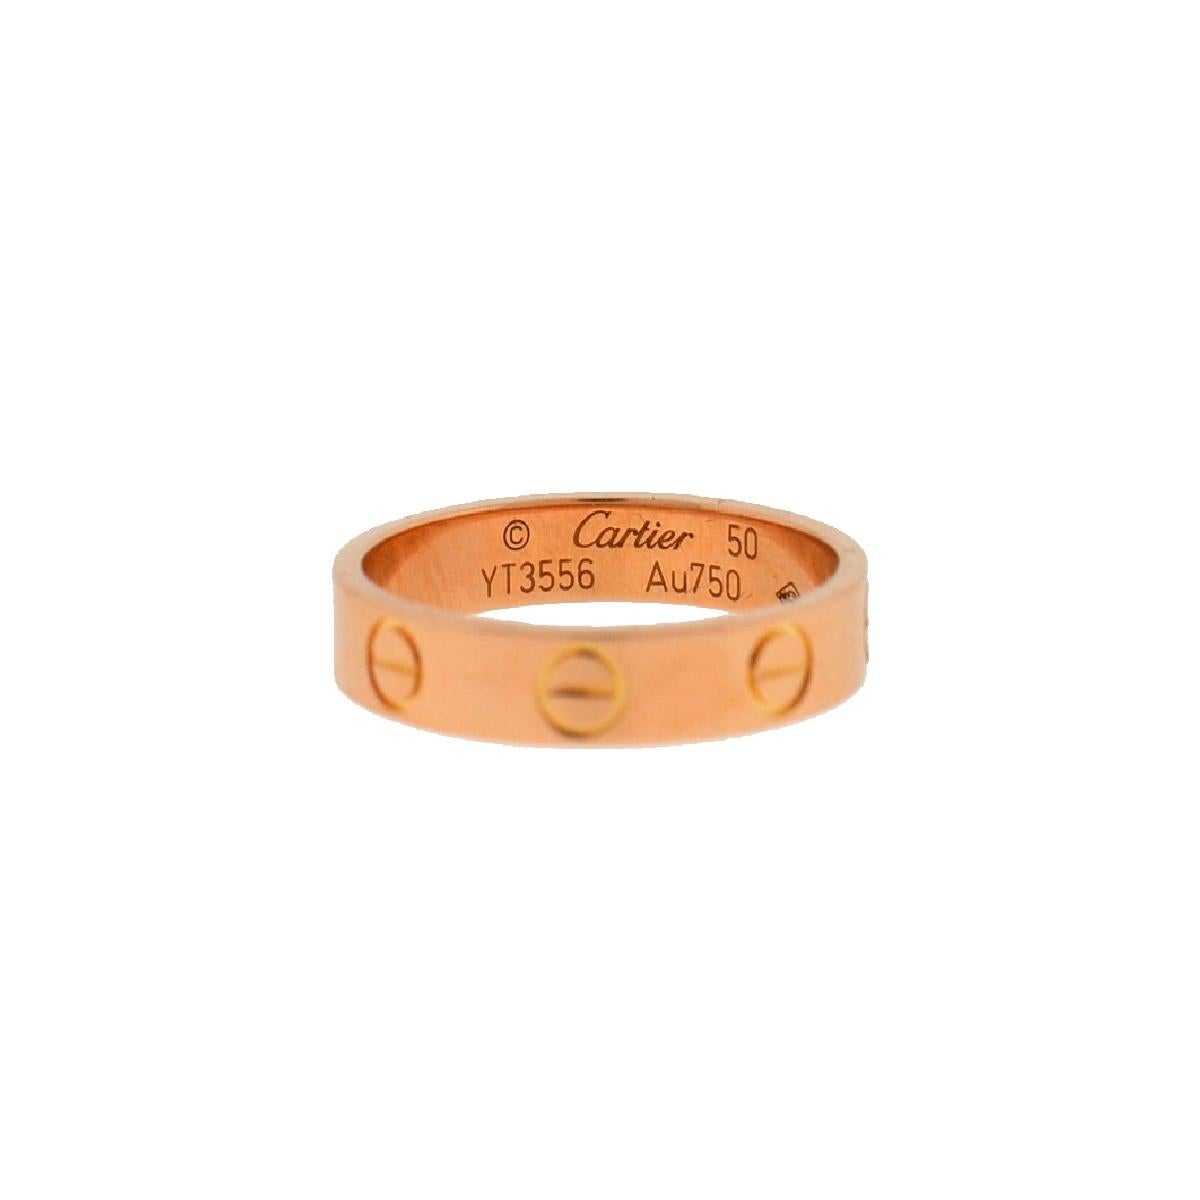 Company-Cartier
Style-Love Ring
Metal-18k Rose Gold
Stones-N/A
Size-5.25
Weight-3.1 G
SKU:8955-2OME